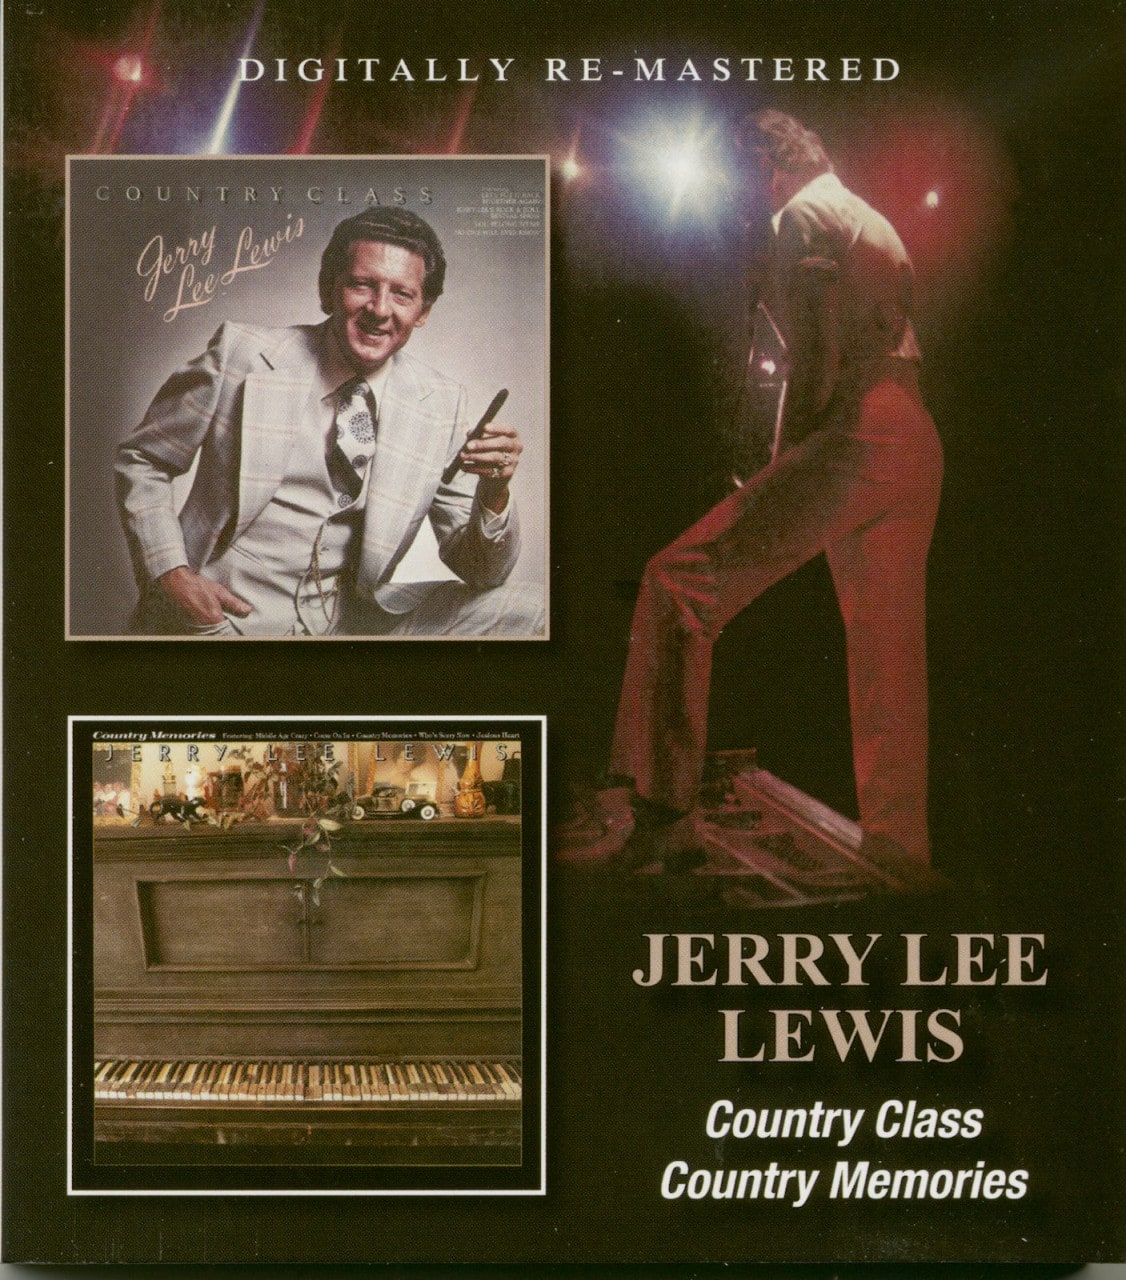 Jerry Lee Lewis - Country Class - Country Memories (CD)